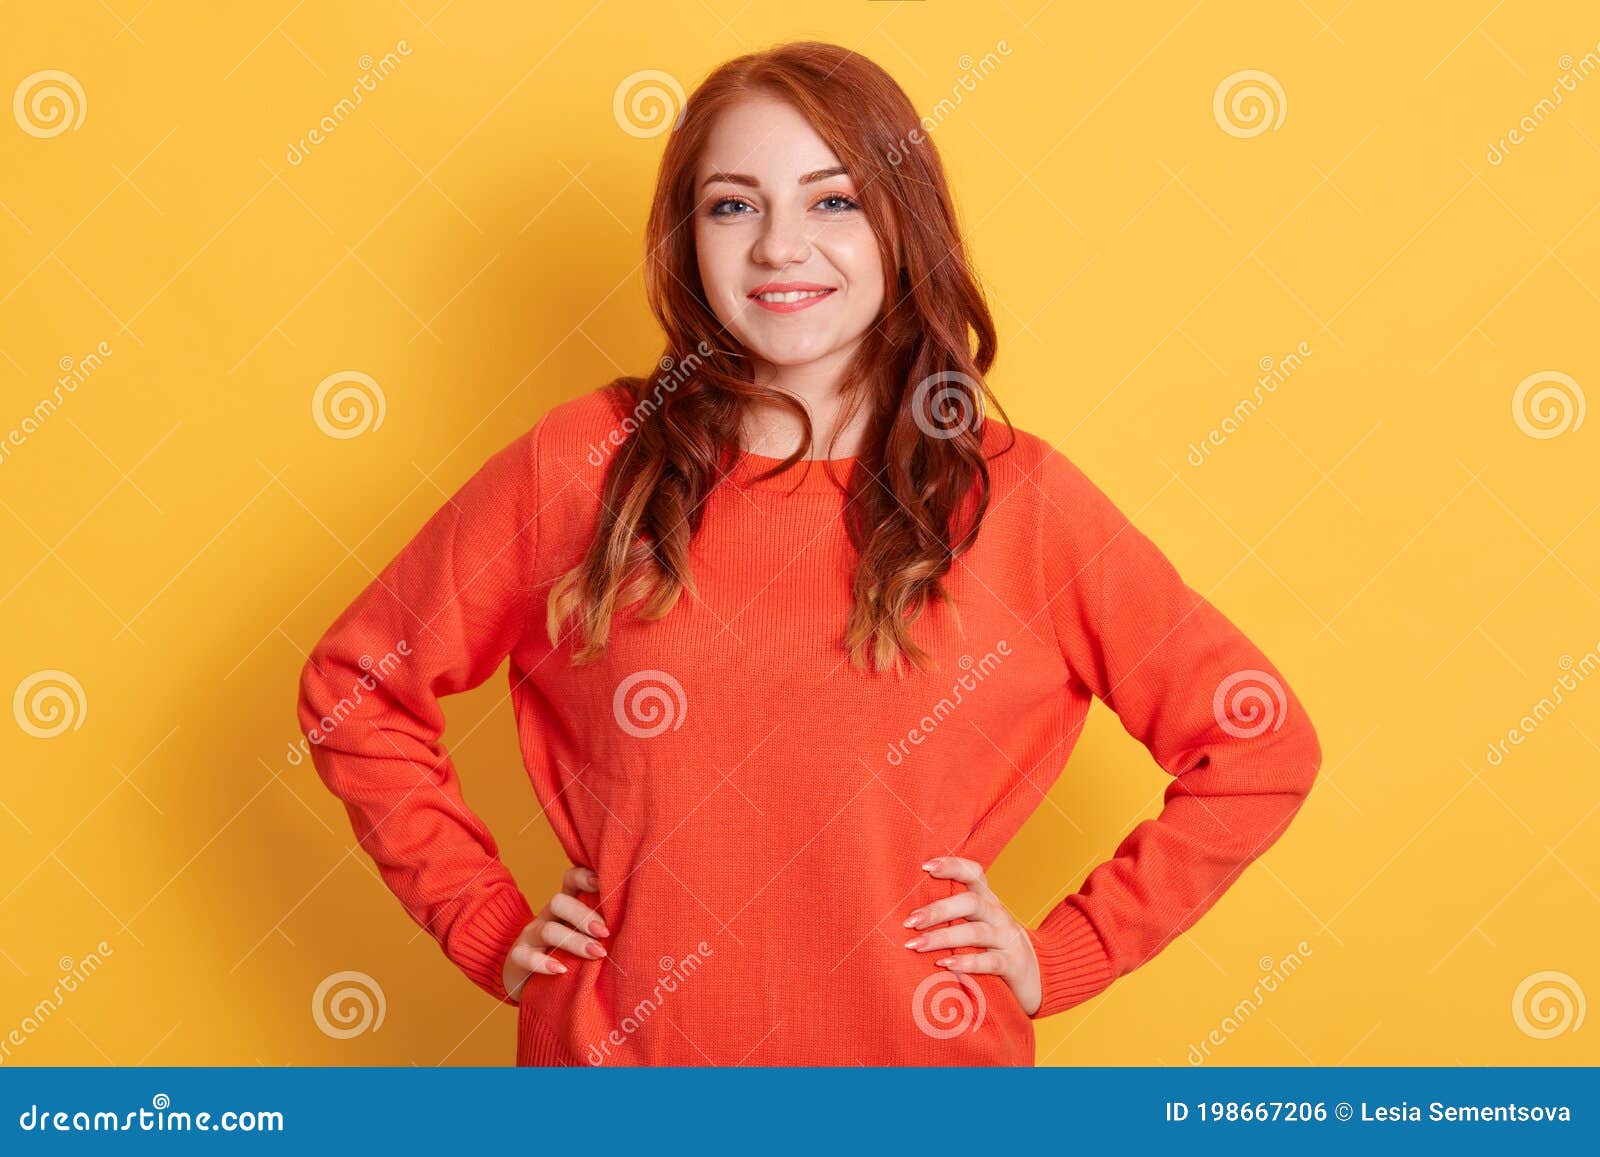 Confident Young Lady with Red Hair Standing with Hands on Hips and ...